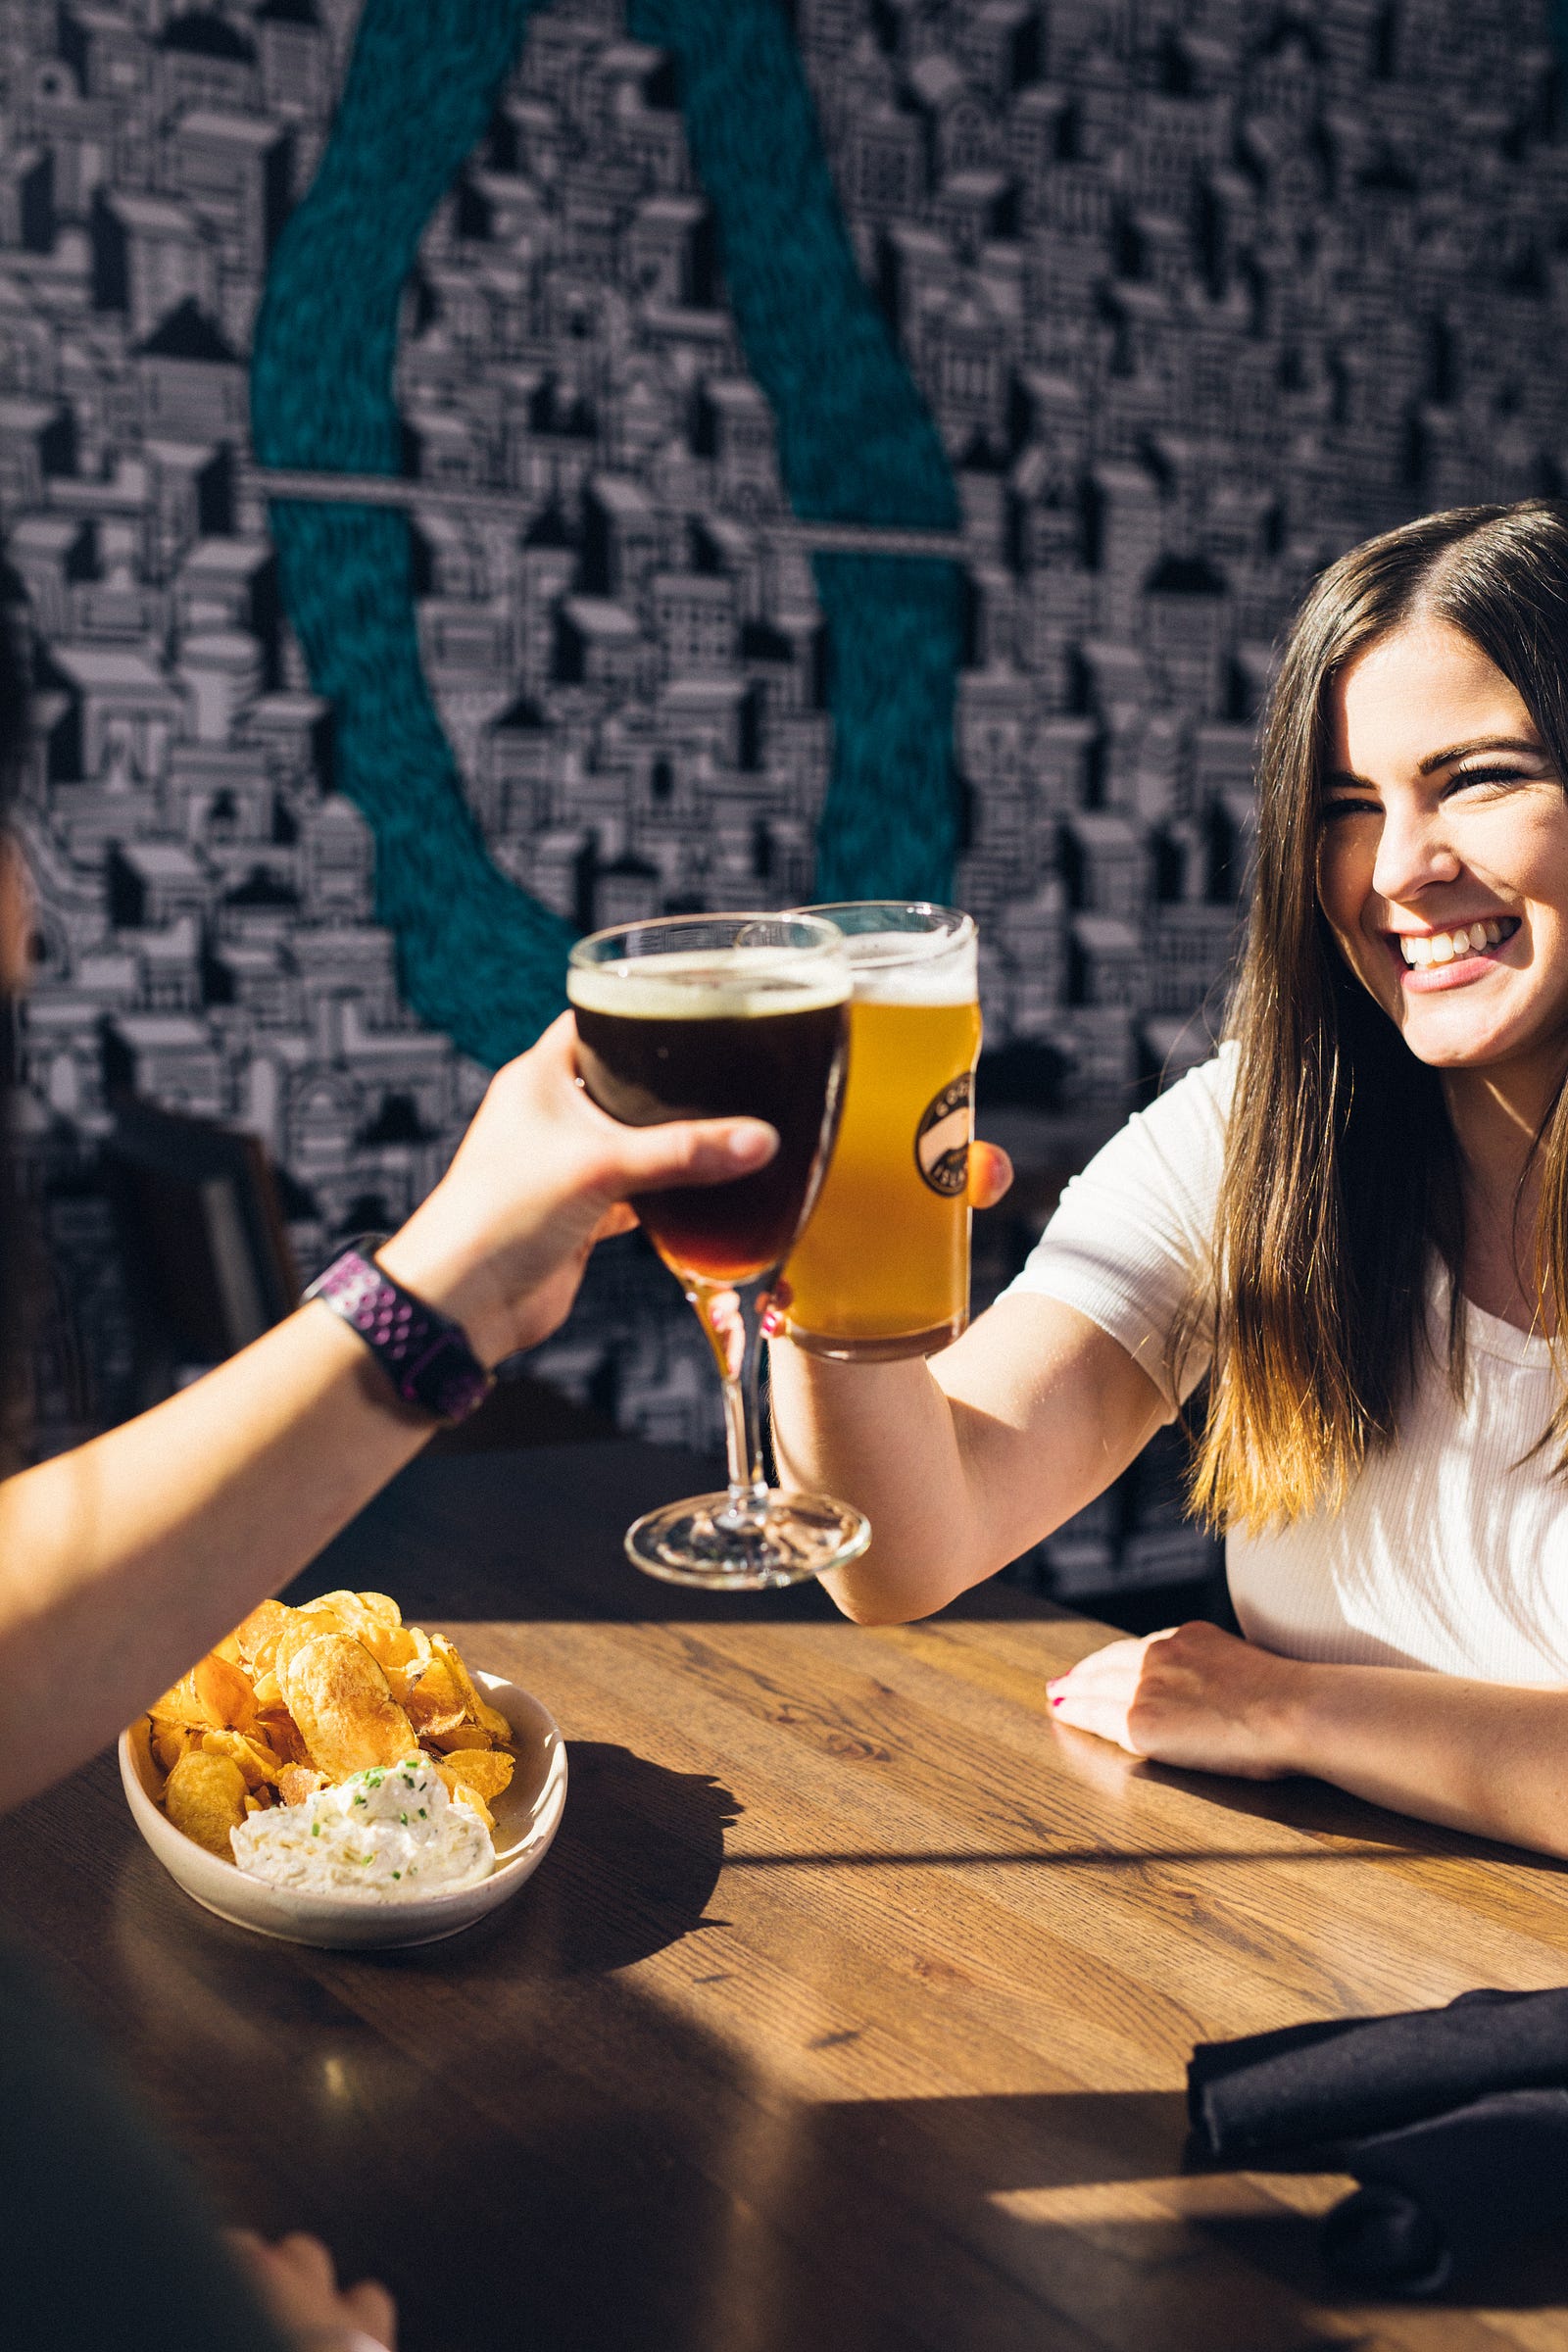 A couple clicks their glasses of beer together. We see the smiling woman on the left and an extended left arm of someone out of image on the left. Approximately 3.5 percent of cancer deaths in the United States (and four percent worldwide) per year are related to alcohol.